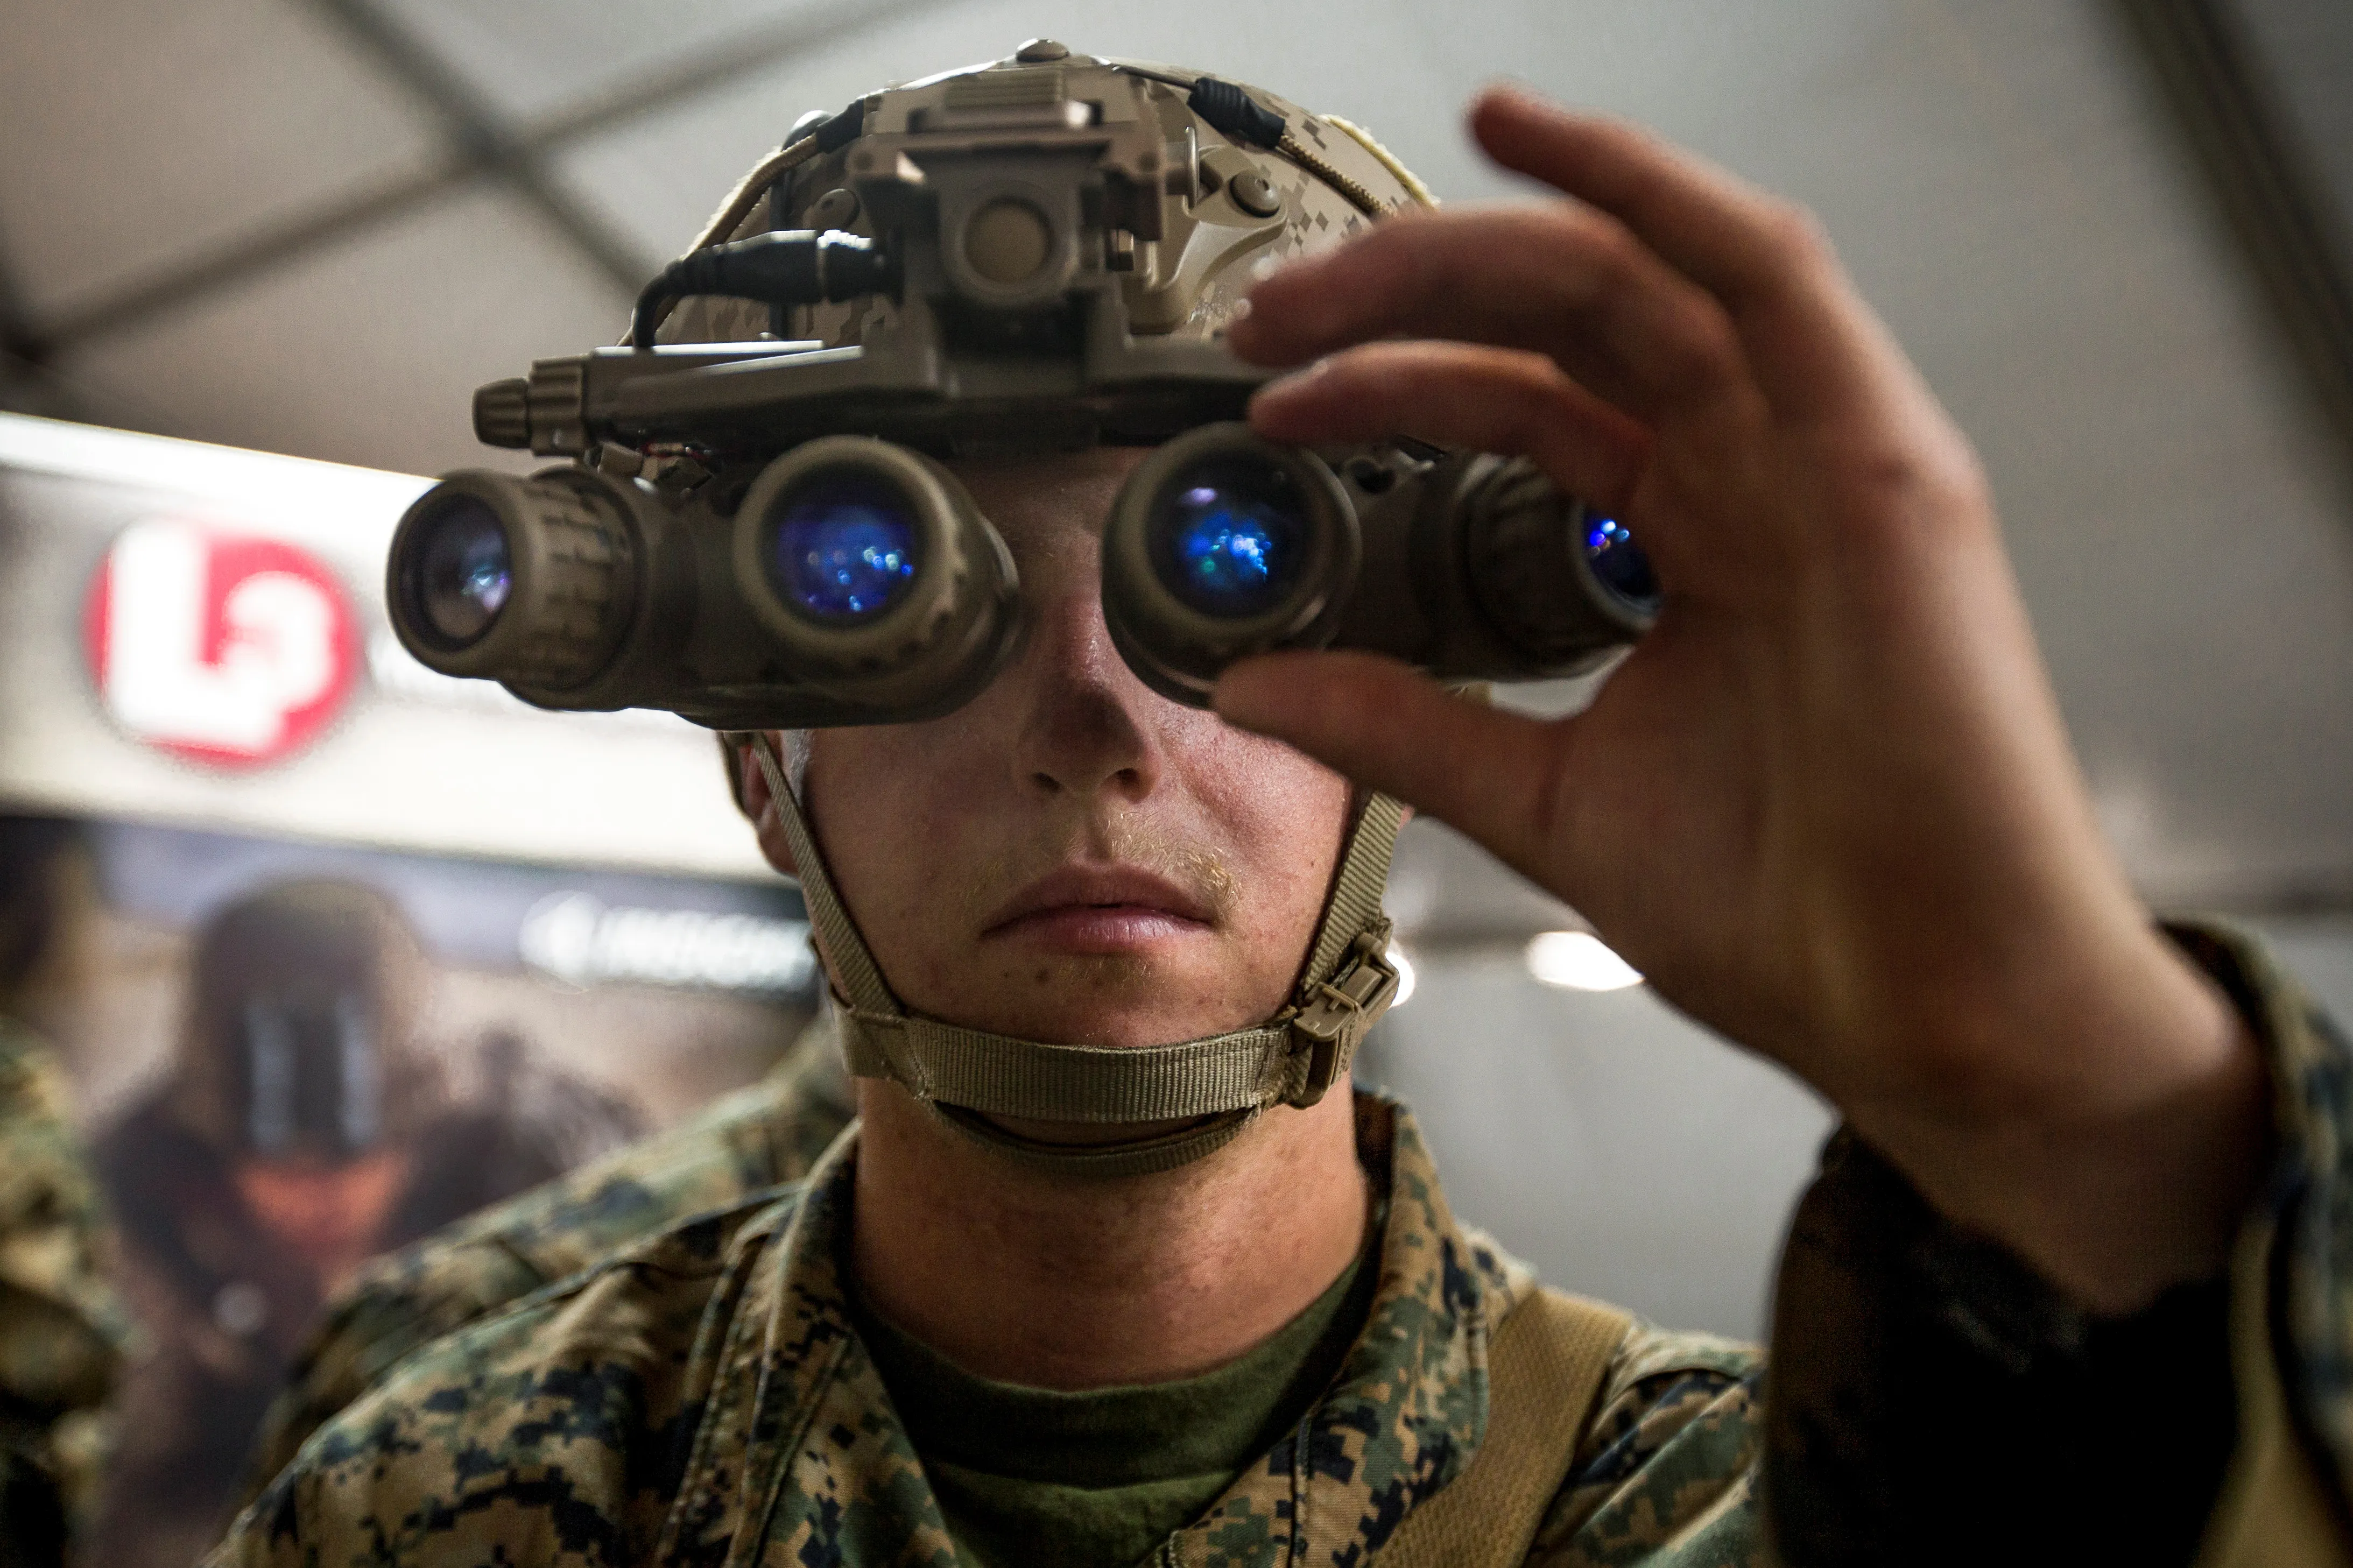 U.S. Marine Corps Lance Cpl. Skyler Stevens uses new night optics technology during Advanced Naval Technology Exercise 2018 (ANTX-18) at Marine Corps Base Camp Pendleton, California, March 19, 2018. Picture taken March 19, 2018.  U.S. Marine Corps/Lance Cpl. Rhita Daniel/Handout via REUTERS.  ATTENTION EDITORS - THIS IMAGE WAS PROVIDED BY A THIRD PARTY